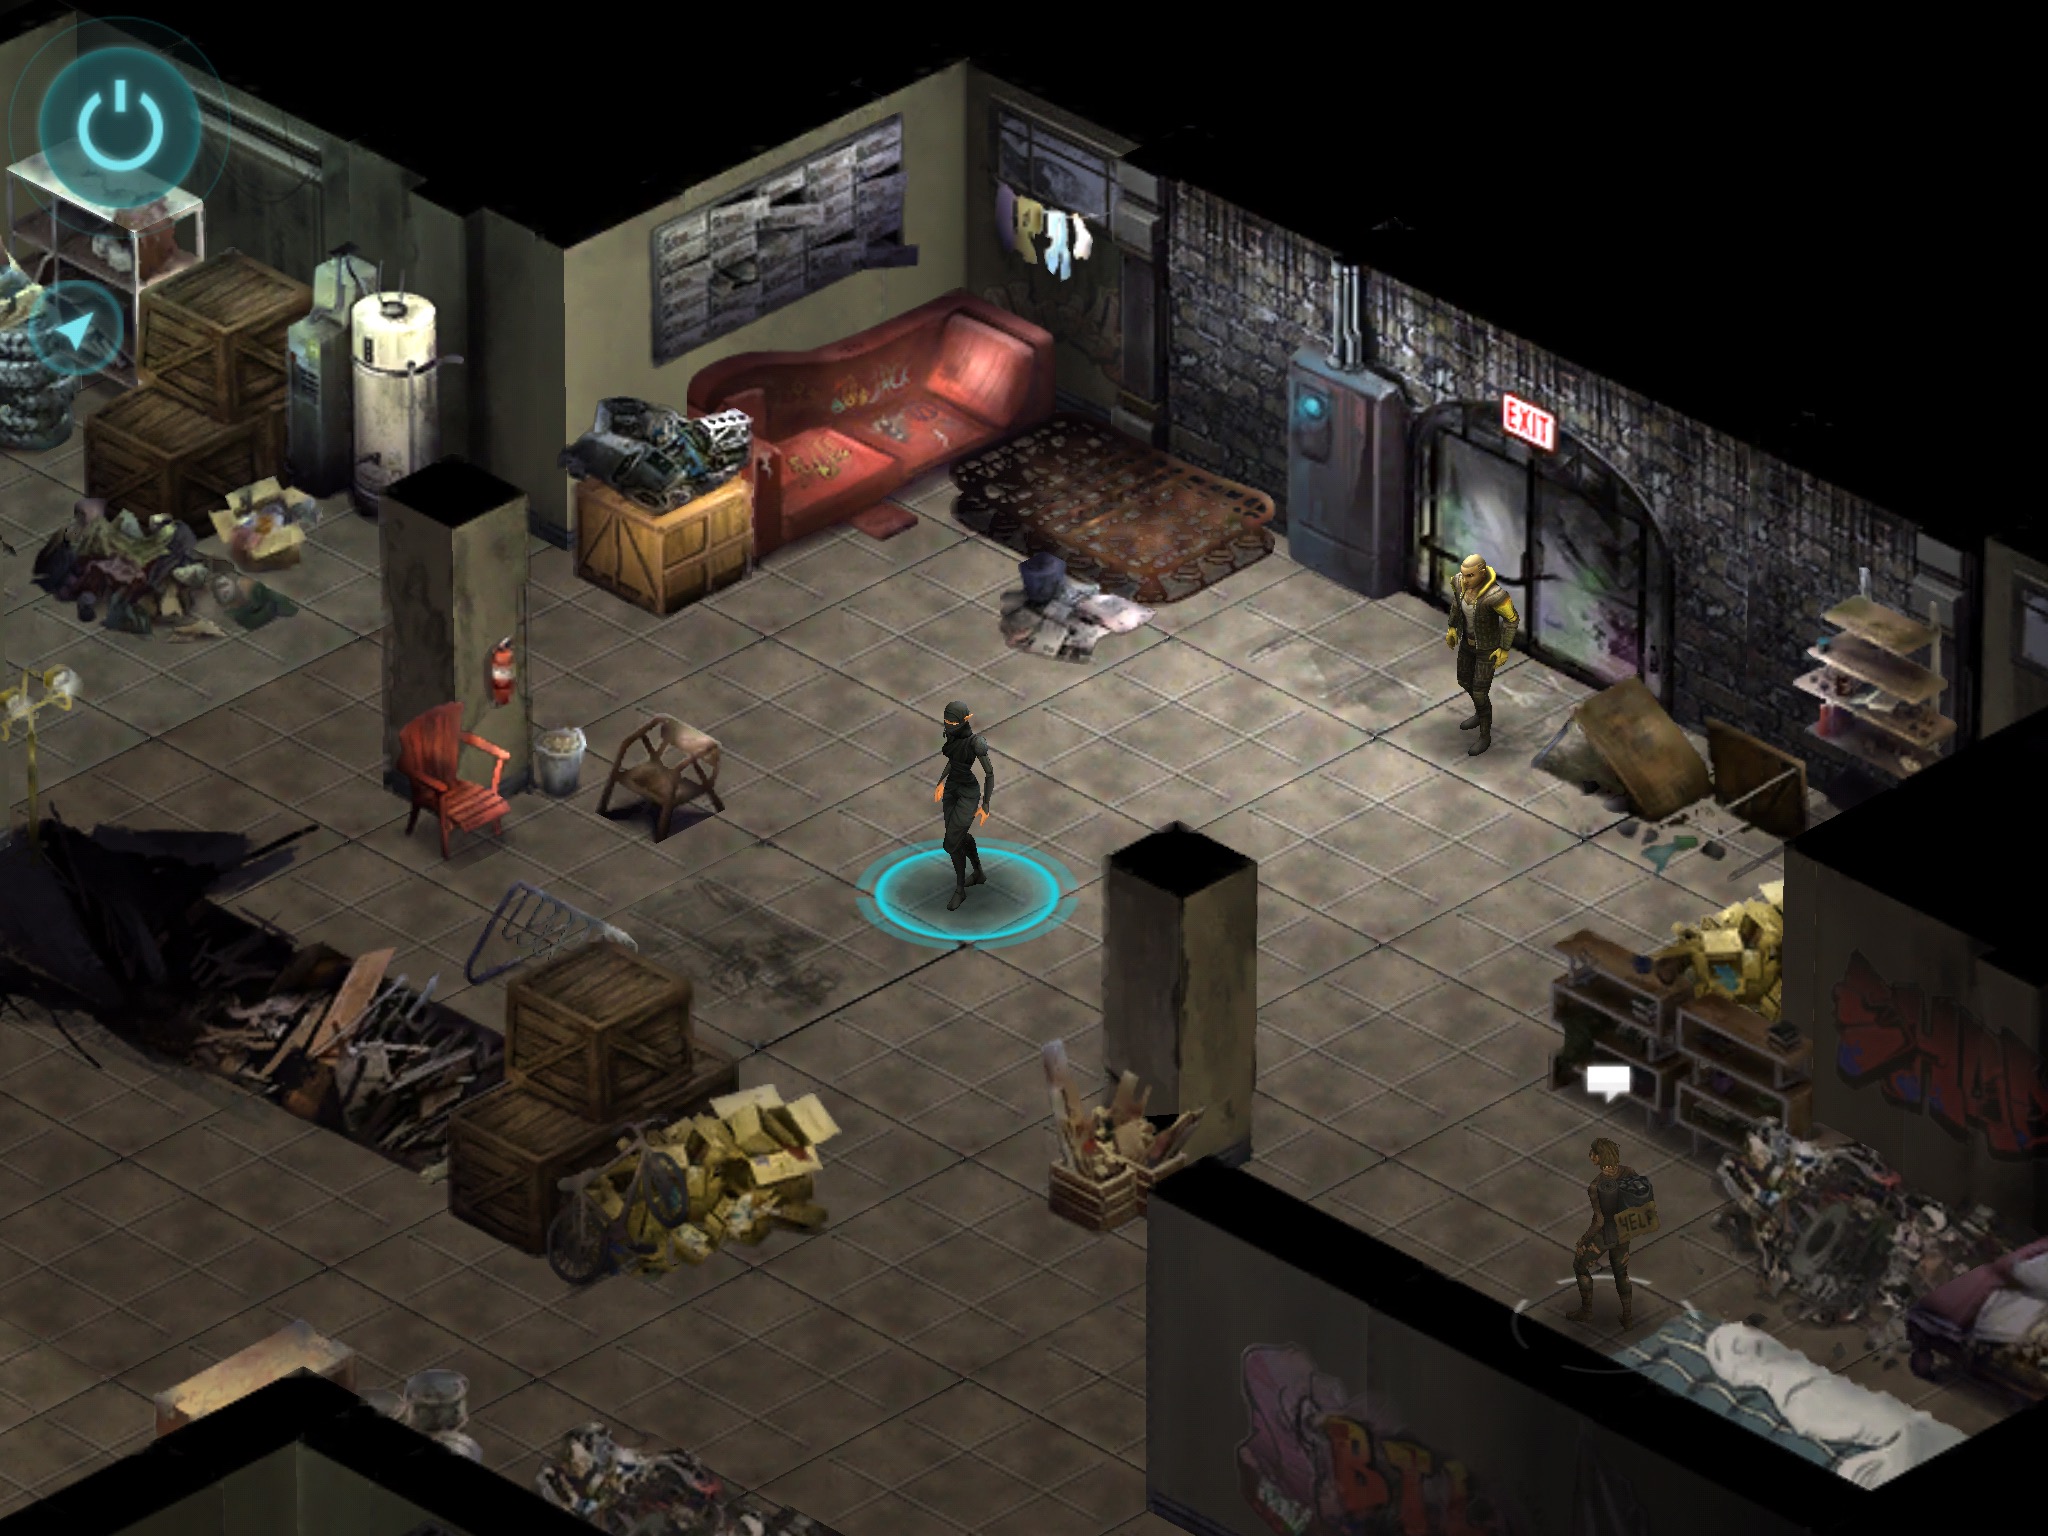 Shadowrun Returns' Is A Fully Realized Tabletop To Digital RPG